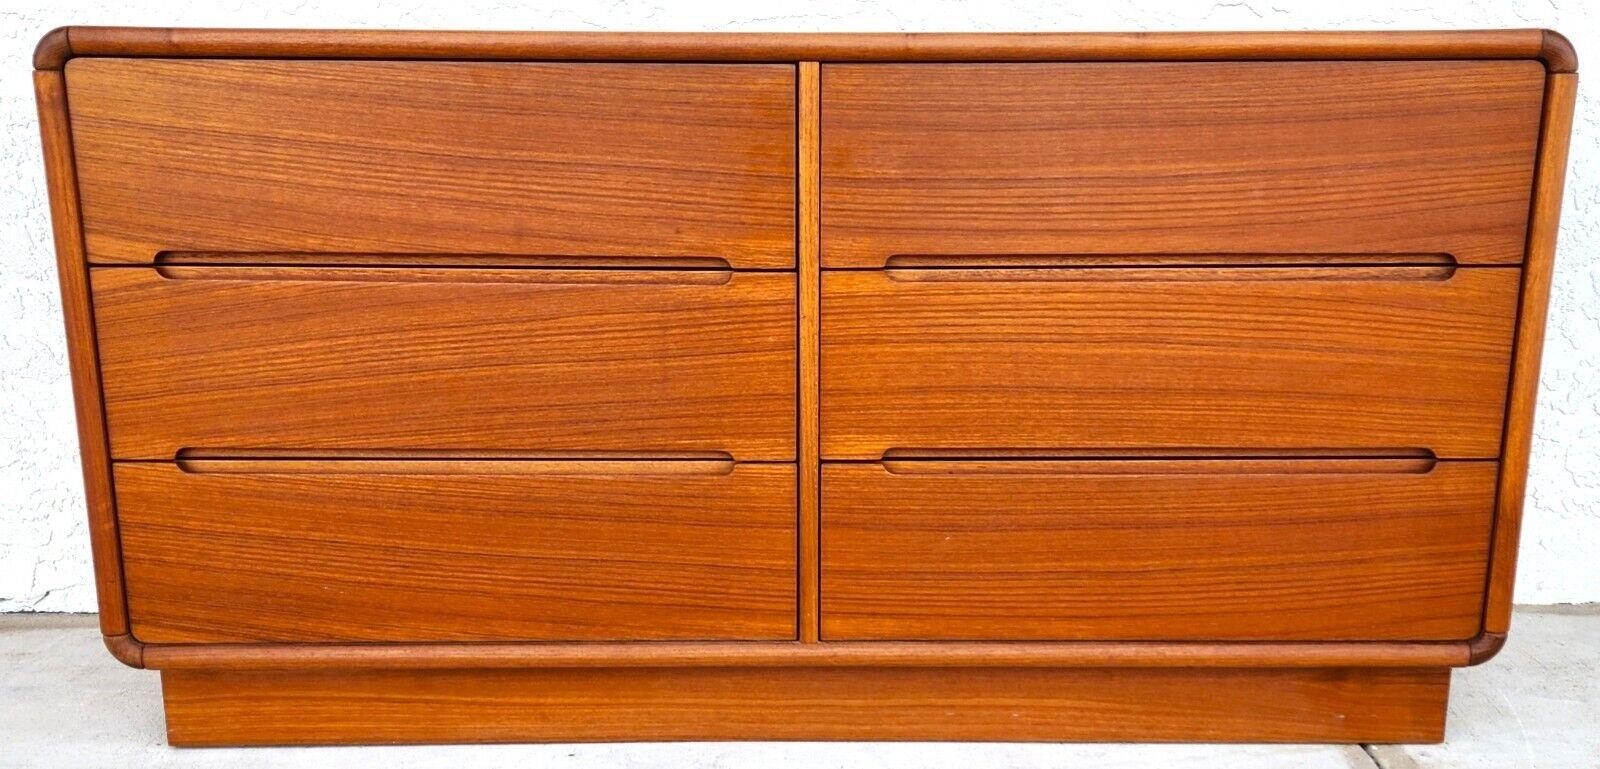 For FULL item description click on CONTINUE READING at the bottom of this page.

Offering One Of Our Recent Palm Beach Estate Fine Furniture Acquisitions Of A
MCM Teak Dresser by Sun Cabinet Co
Drawers are clean, work smoothly and are